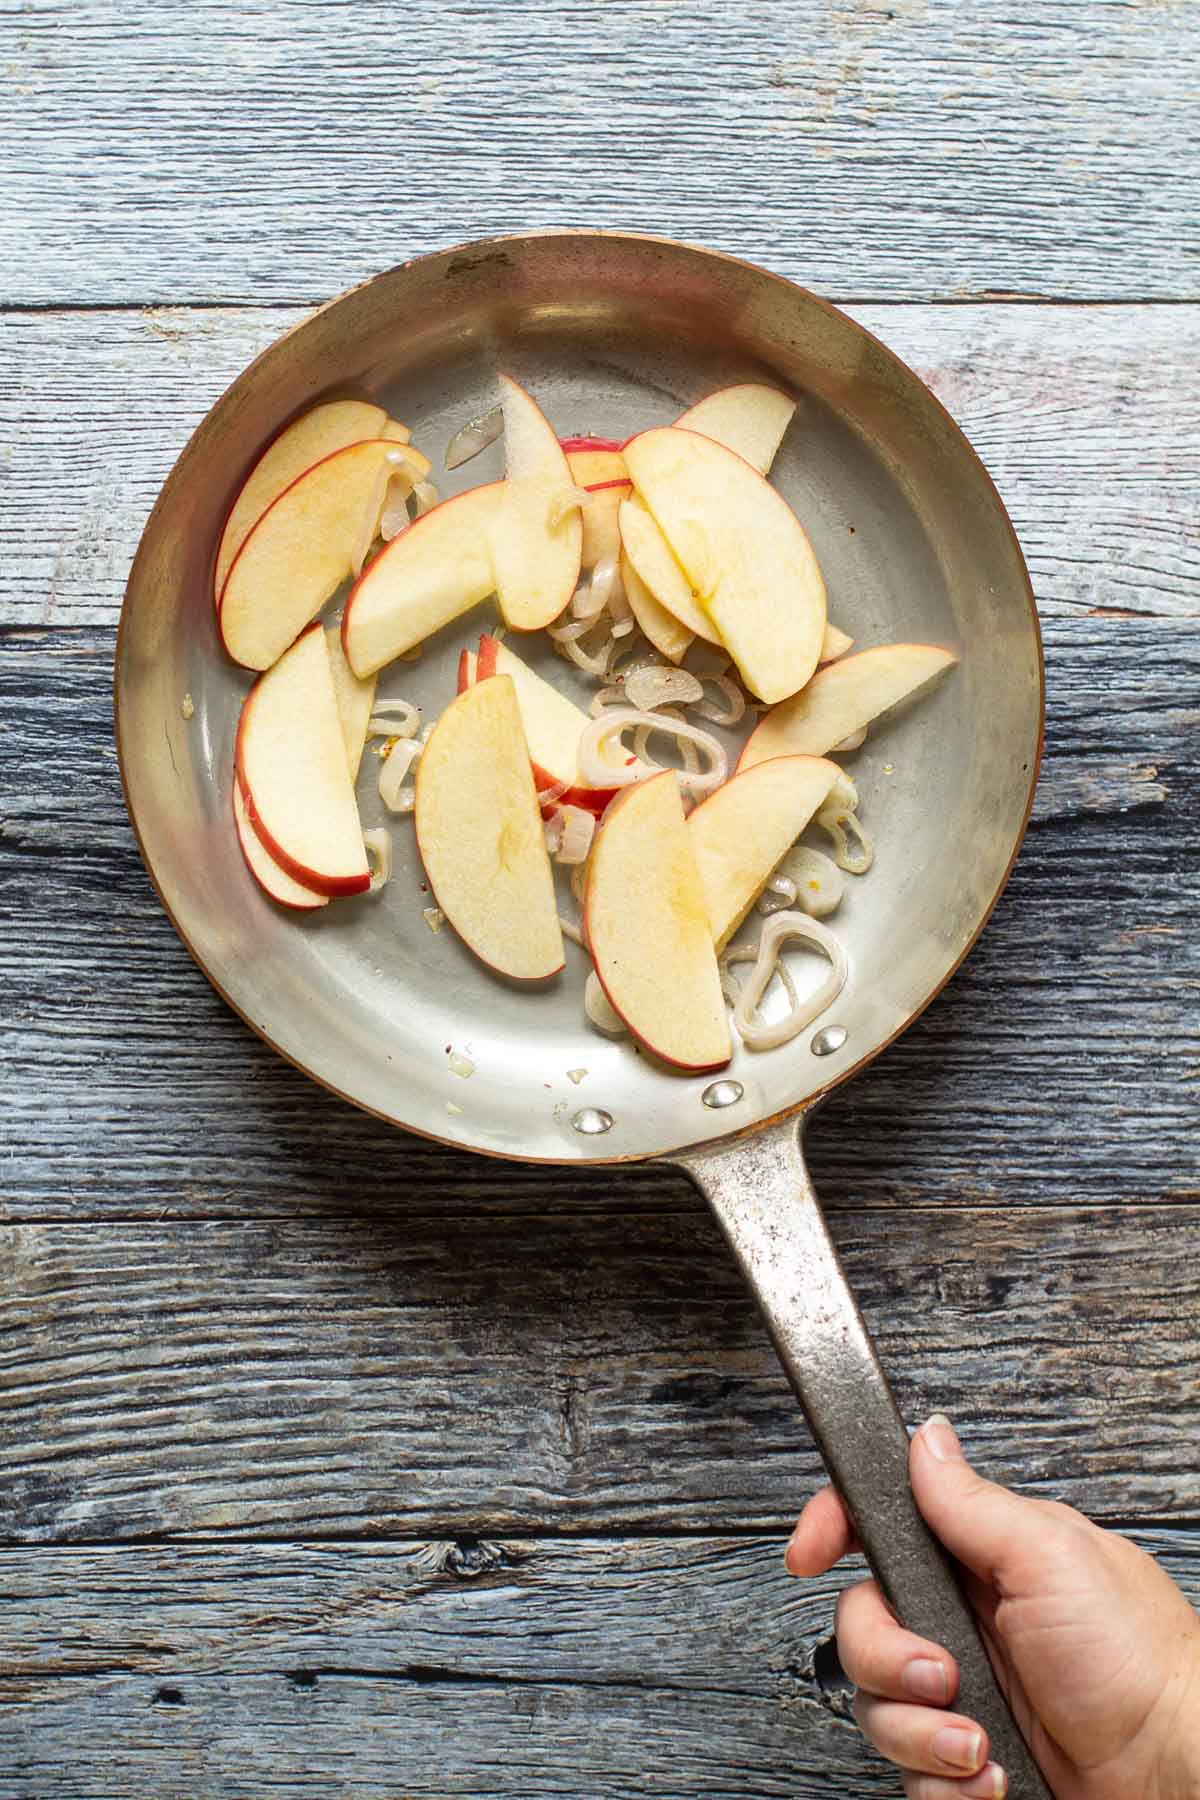 Sliced apples and shallots in a saute pan